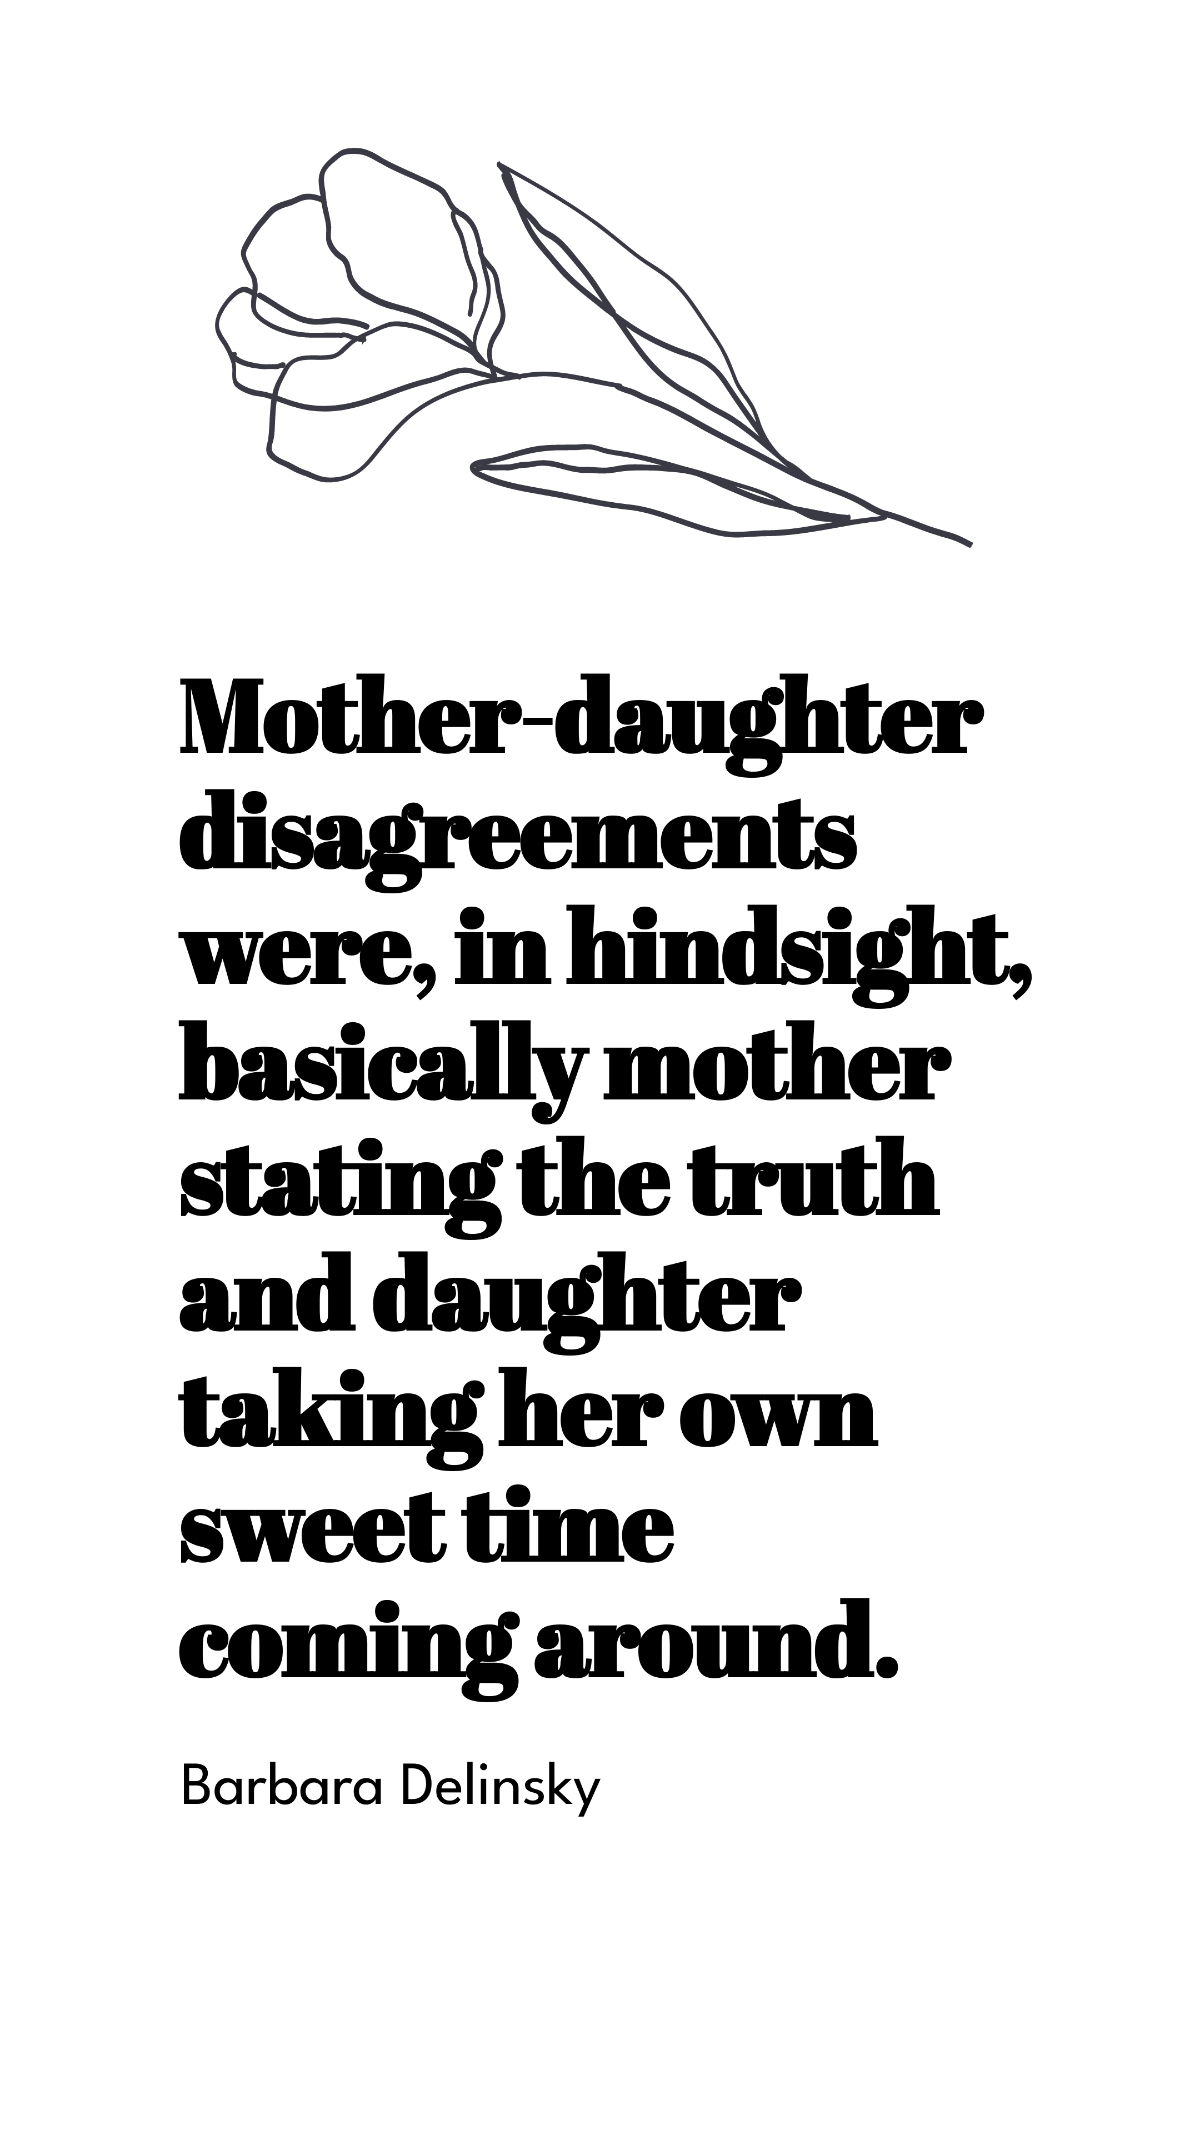 Free Barbara Delinsky - Mother-daughter disagreements were, in hindsight, basically mother stating the truth and daughter taking her own sweet time coming around. Template